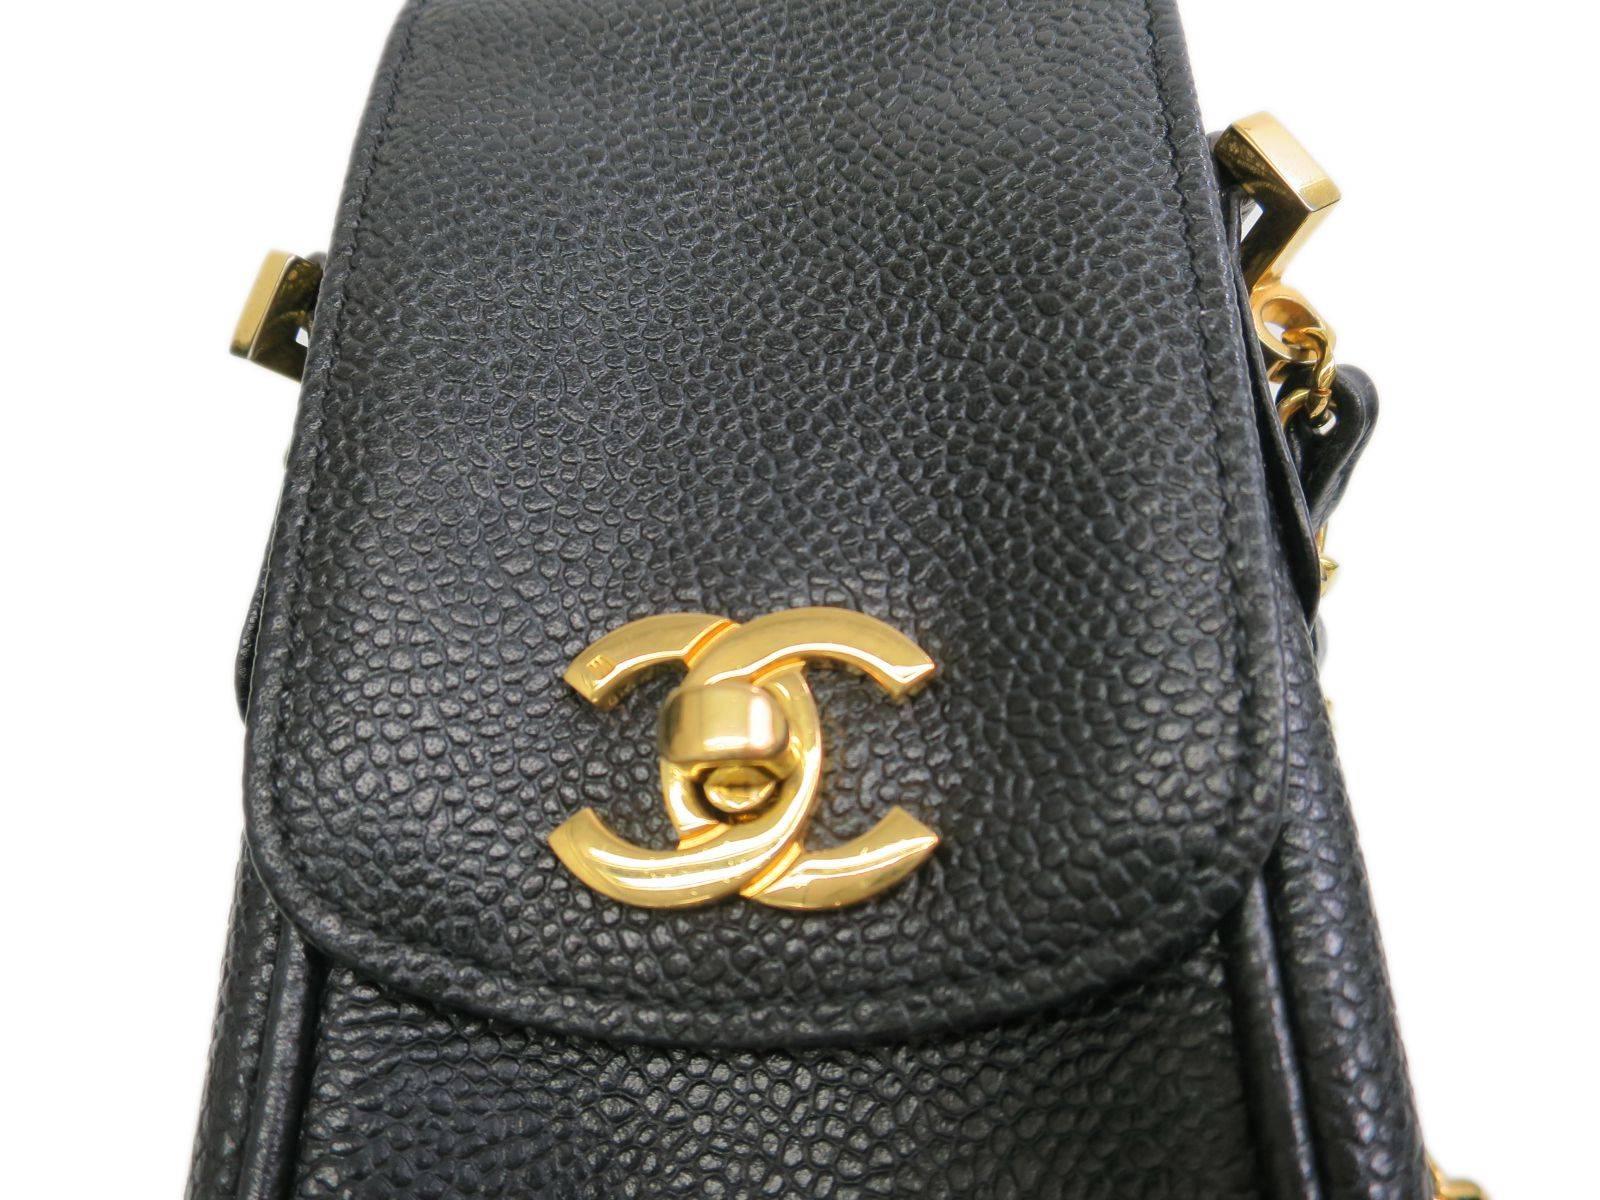 CURATOR'S NOTES

Go hands free with this chic Chanel caviar crossbody phone case, which comes in handy for nights out or weekend outings.  Suitable for an iPhone 6s or 6s Plus (or smaller).

Caviar leather
Gold hardware
Turnlock closure
Made